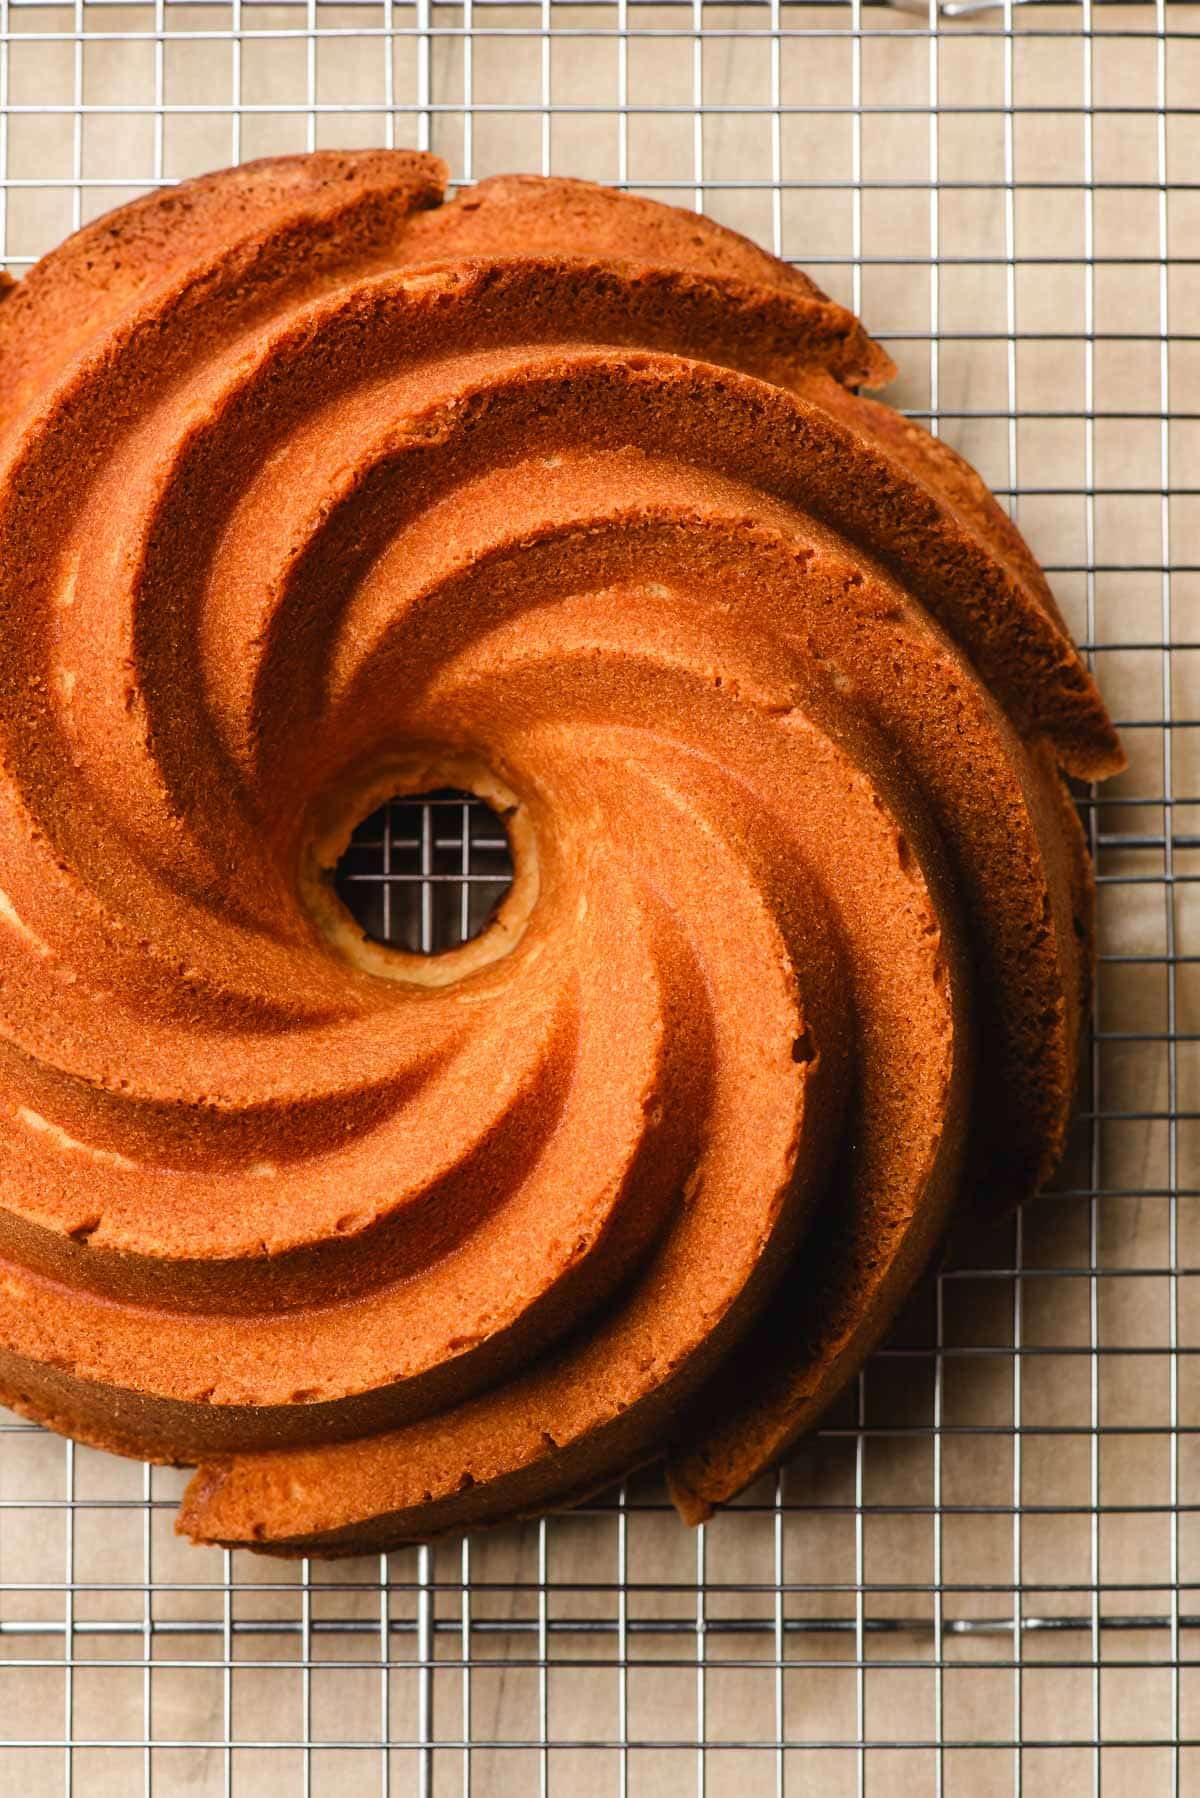 Freshly baked pound bundt cake on a wire cooling rack.